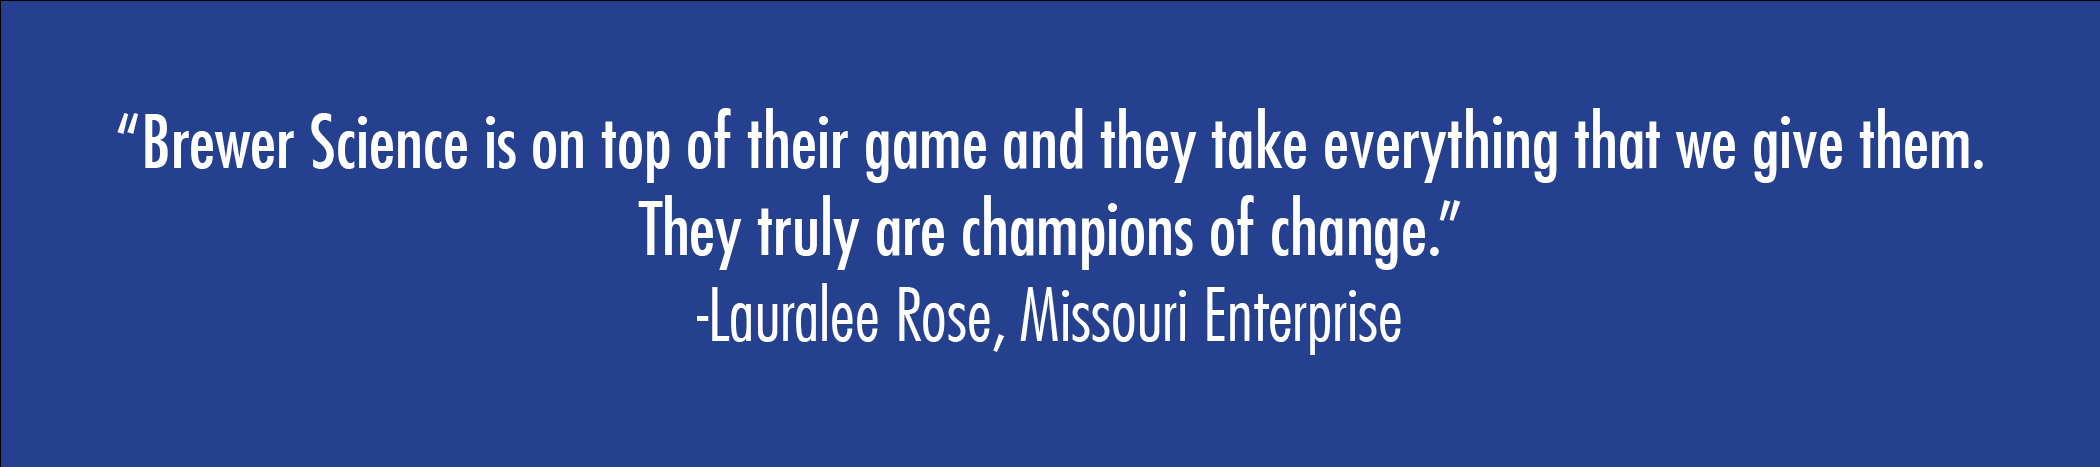 Quote from Lauralee Rose, Missouri Enterprise